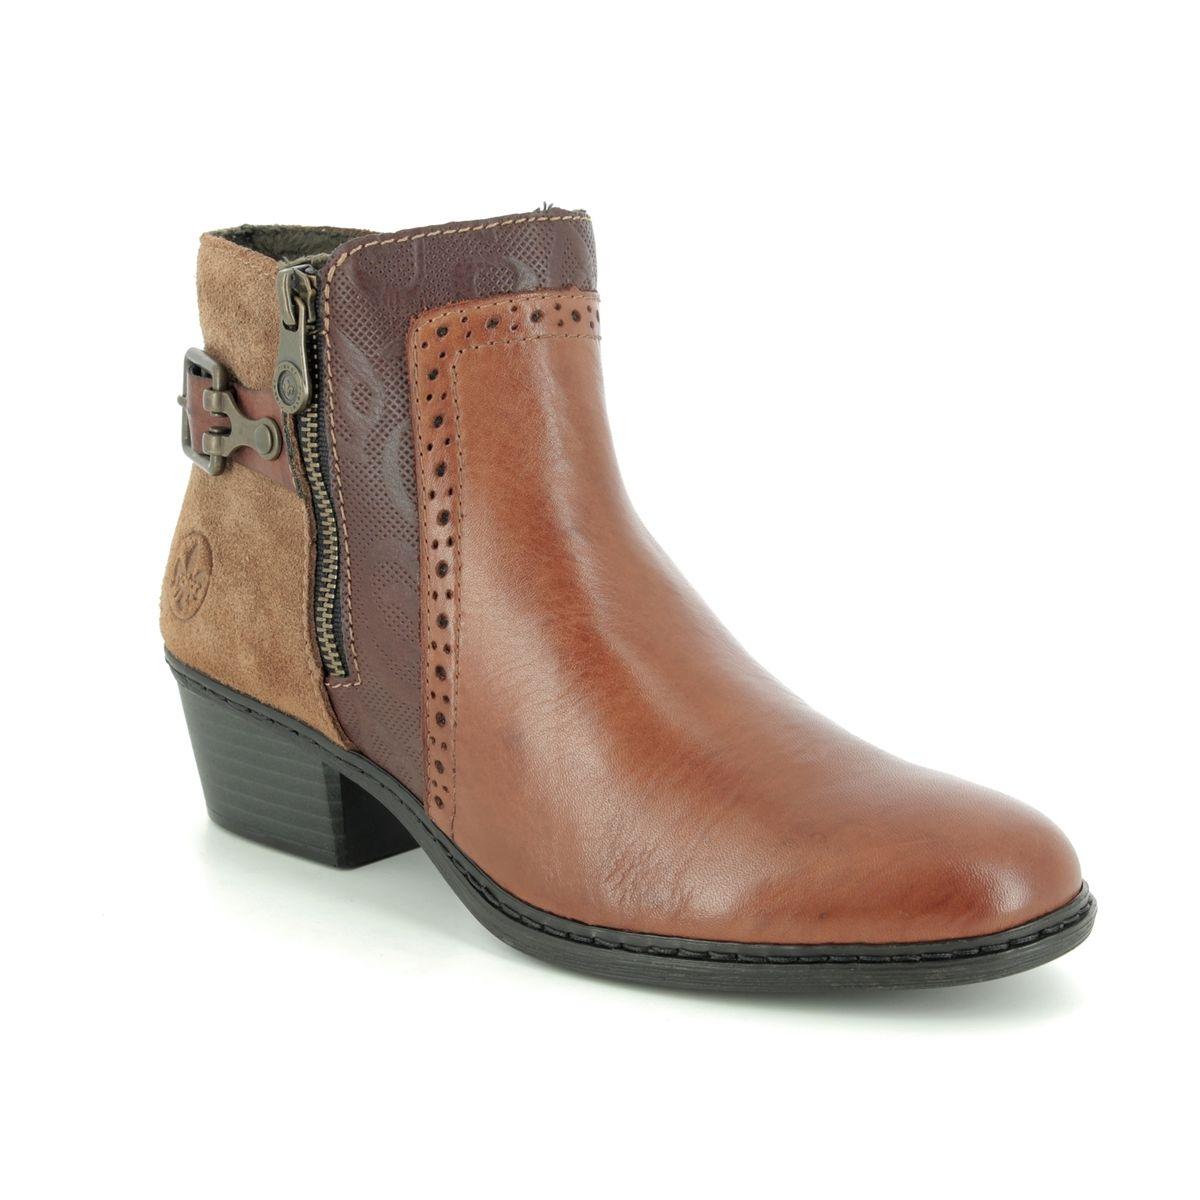 rieker ankle boots canada